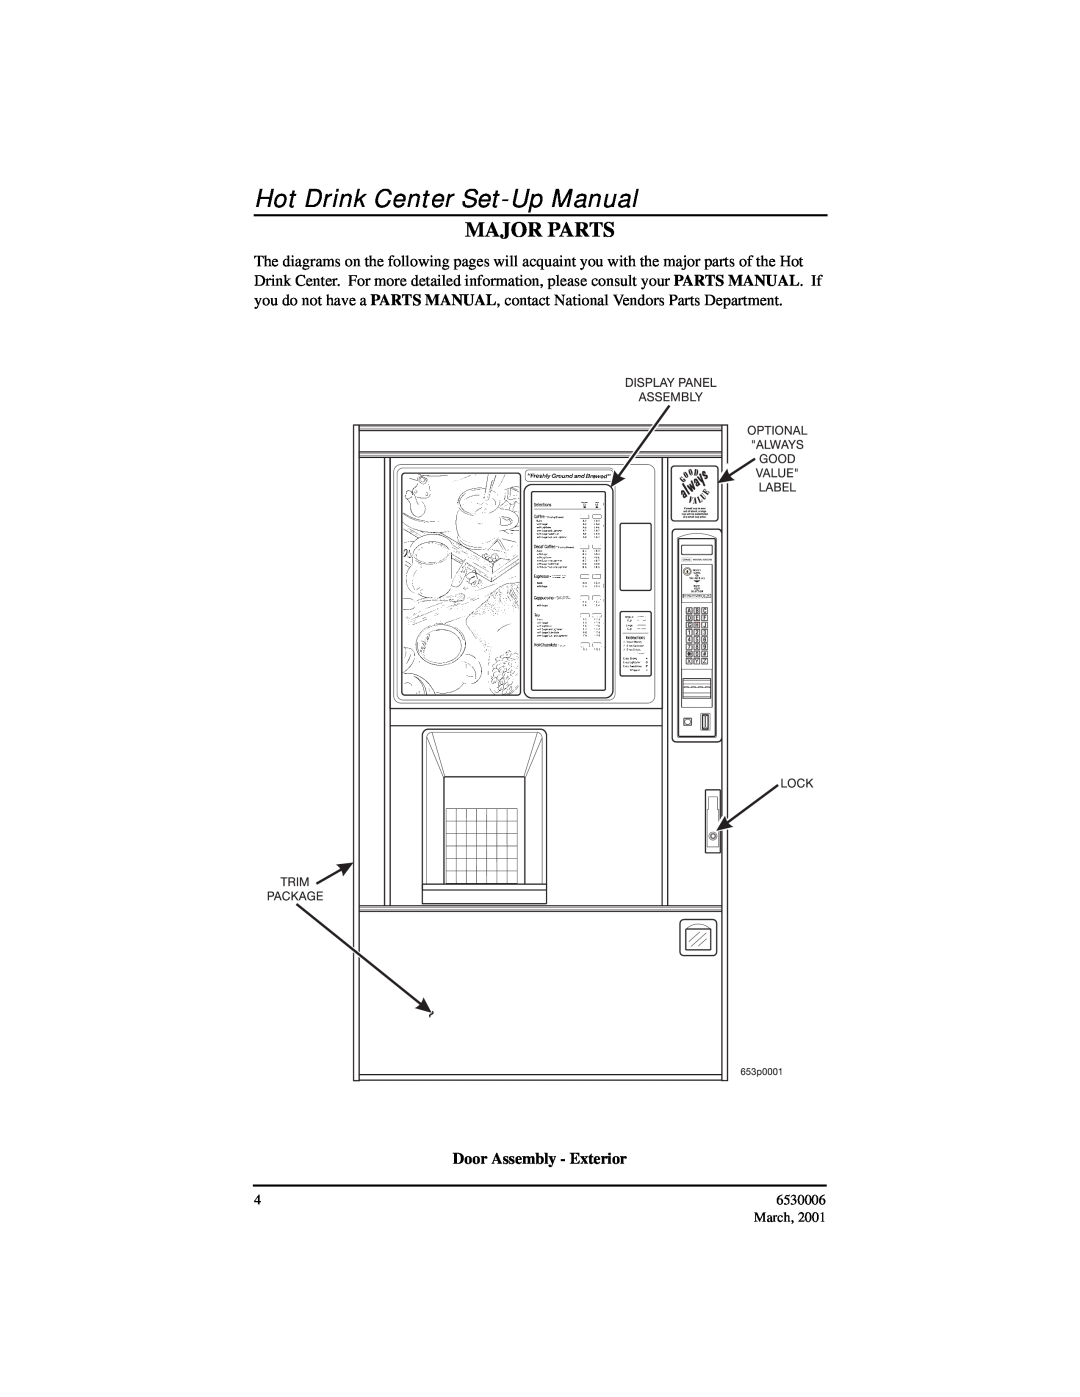 Crane Merchandising Systems manual Major Parts, Hot Drink Center Set-Up Manual, Door Assembly - Exterior, 6530006, March 